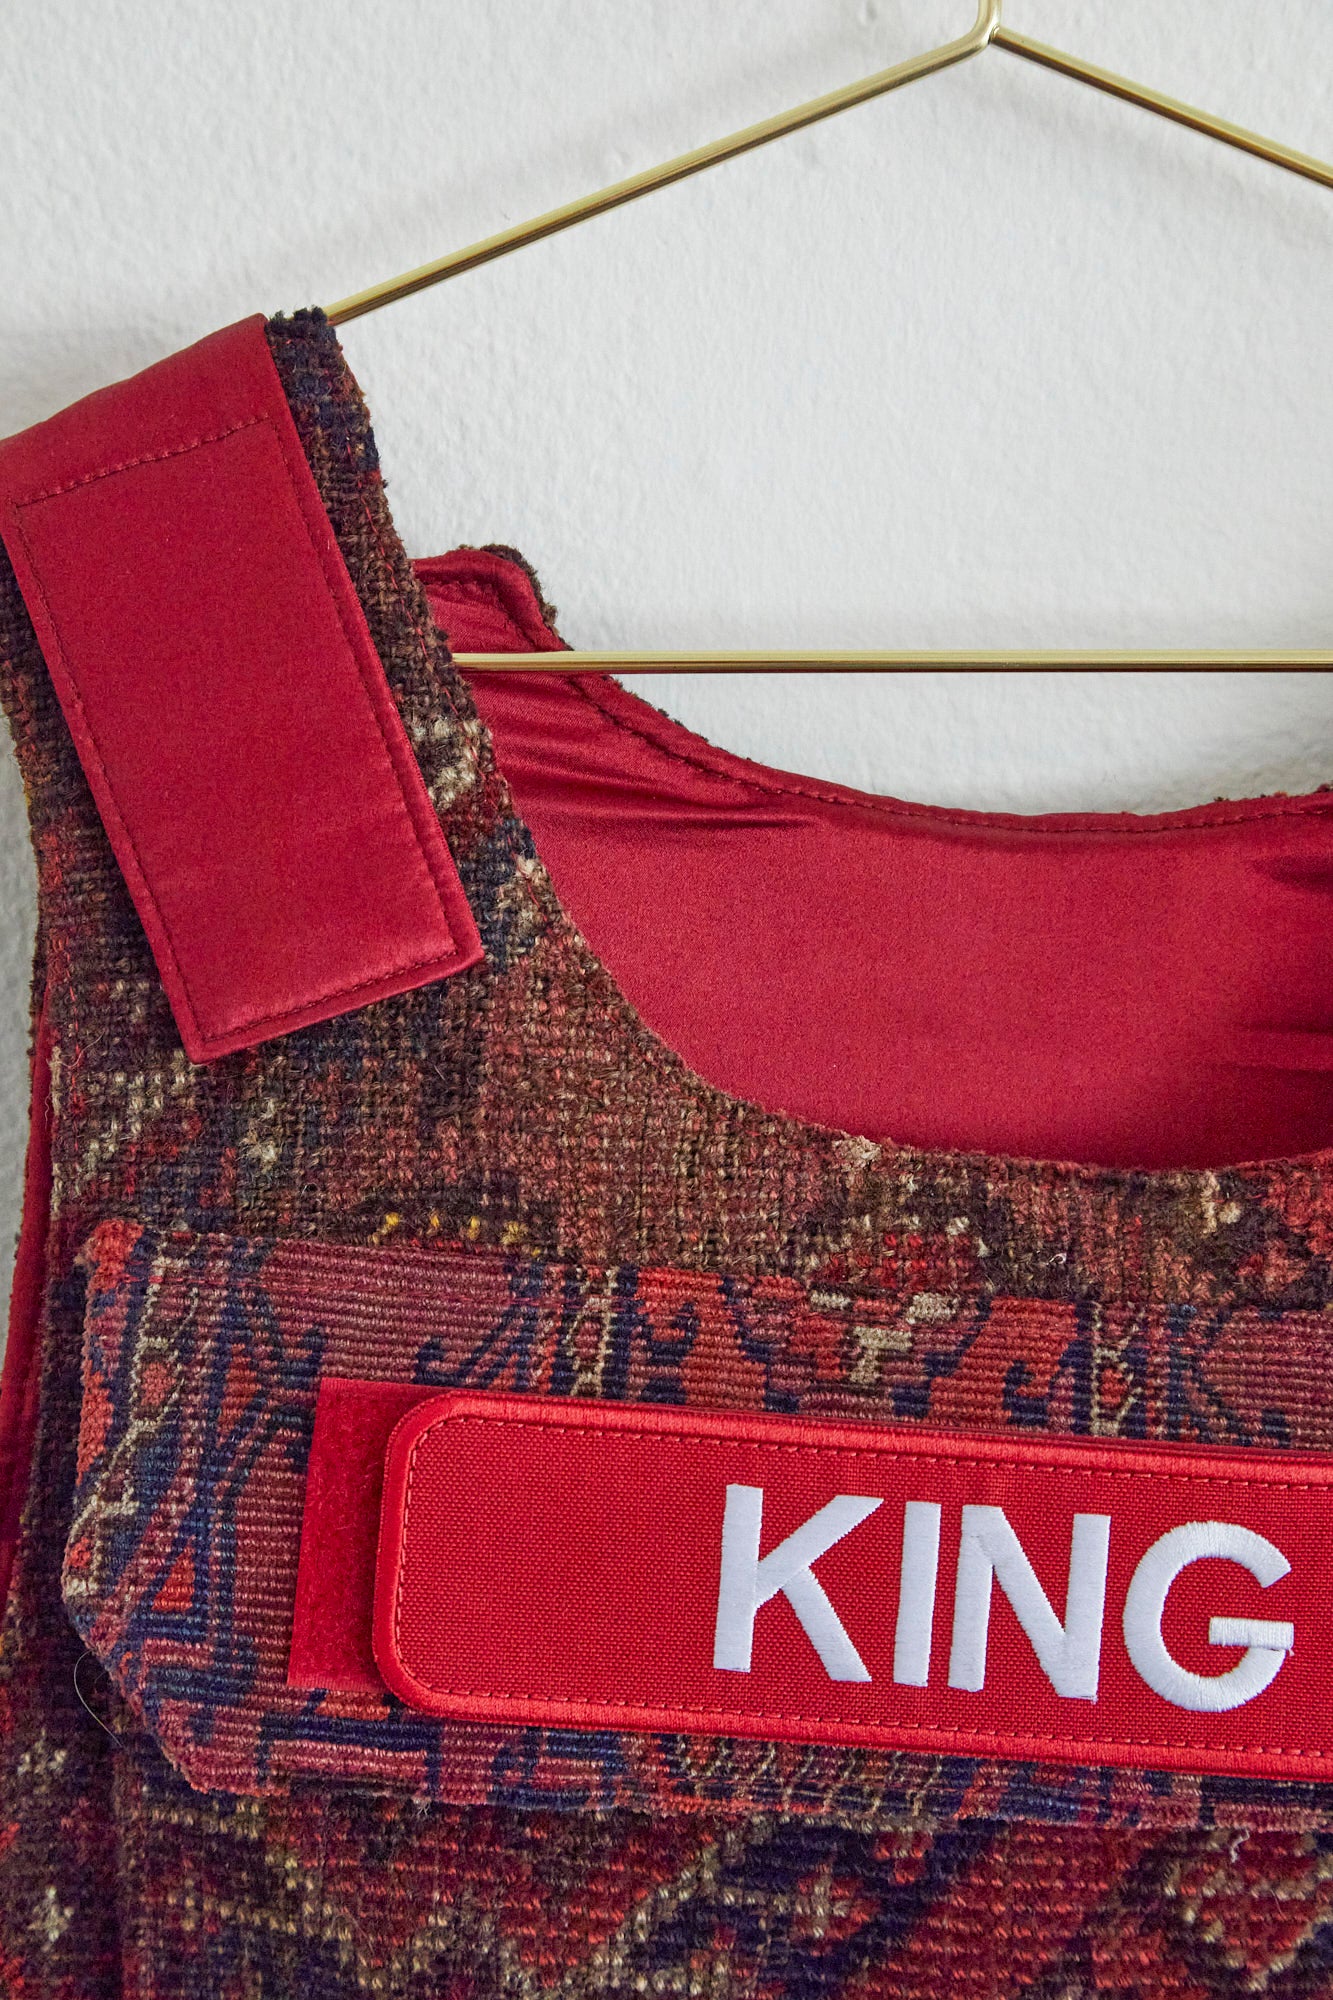 King Plate Carrier – King Kennedy Rugs